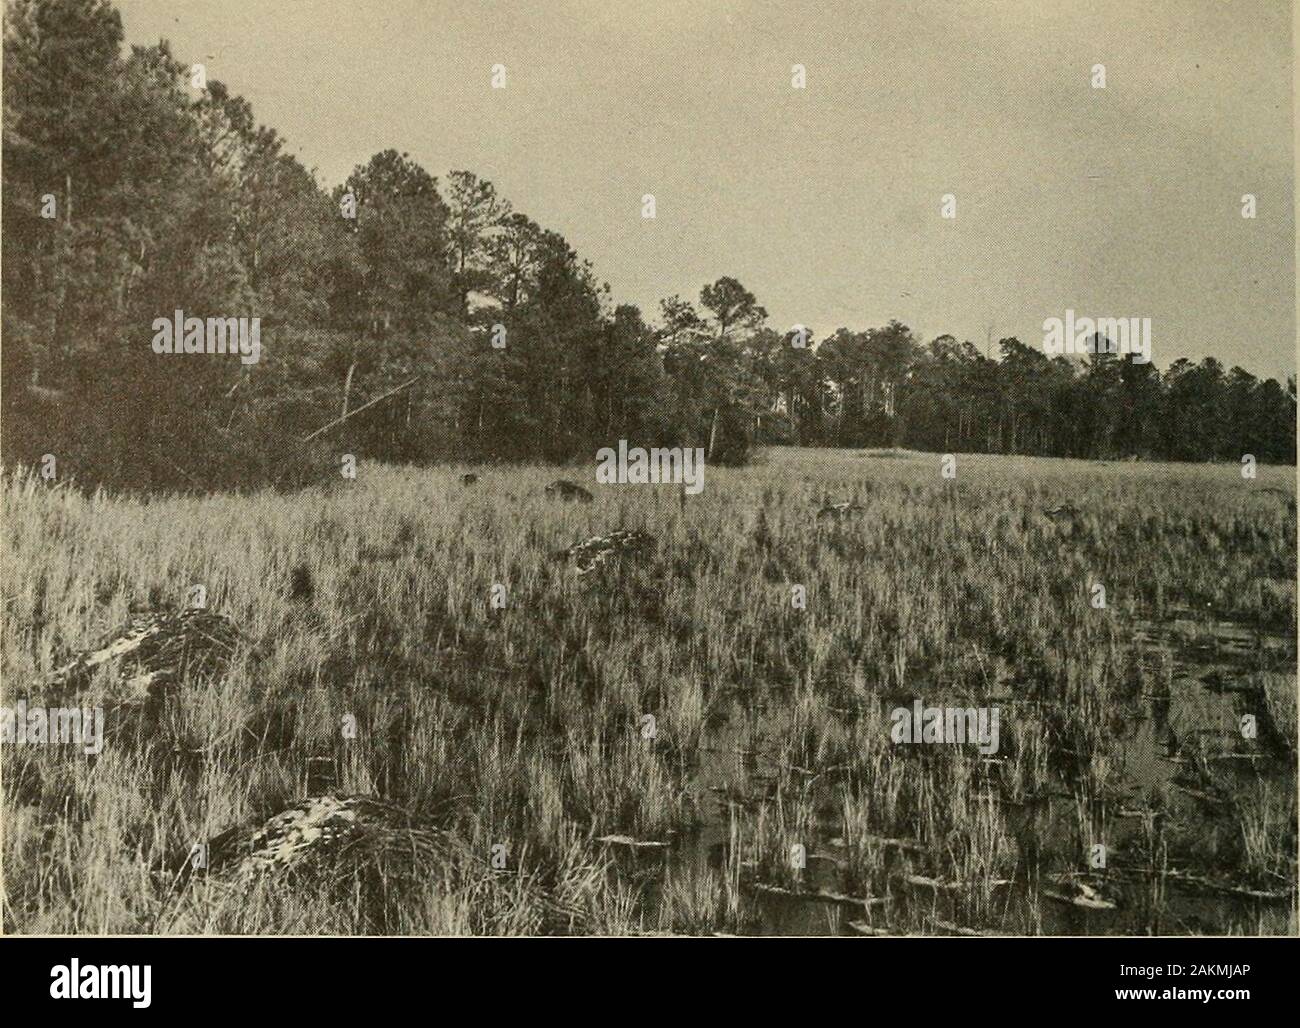 North American fauna . Figure 15.—Big cordgrass (Spartina cynosuroides) (tall plant) and arrow-arum (Peltandra virginica) (broad-leaved plant next to water) along tidalcreek, Nanticoke River marsh, Wicomico County, Md., August 1967. Bigcordgrass usually grows along the margins of tidal guts in brackish baymarshes, but may form extensive, nearly pure stands in brackish tidal-rivermashes. It is one of the most important cover types for King Rails in theChesapeake Bay region. (Photograph by Luther Goldman.) 34 NORTH AMERICAN FAUNA 67. Figure 16.—Winter abode of King Rail. Rappahannock River near Stock Photo